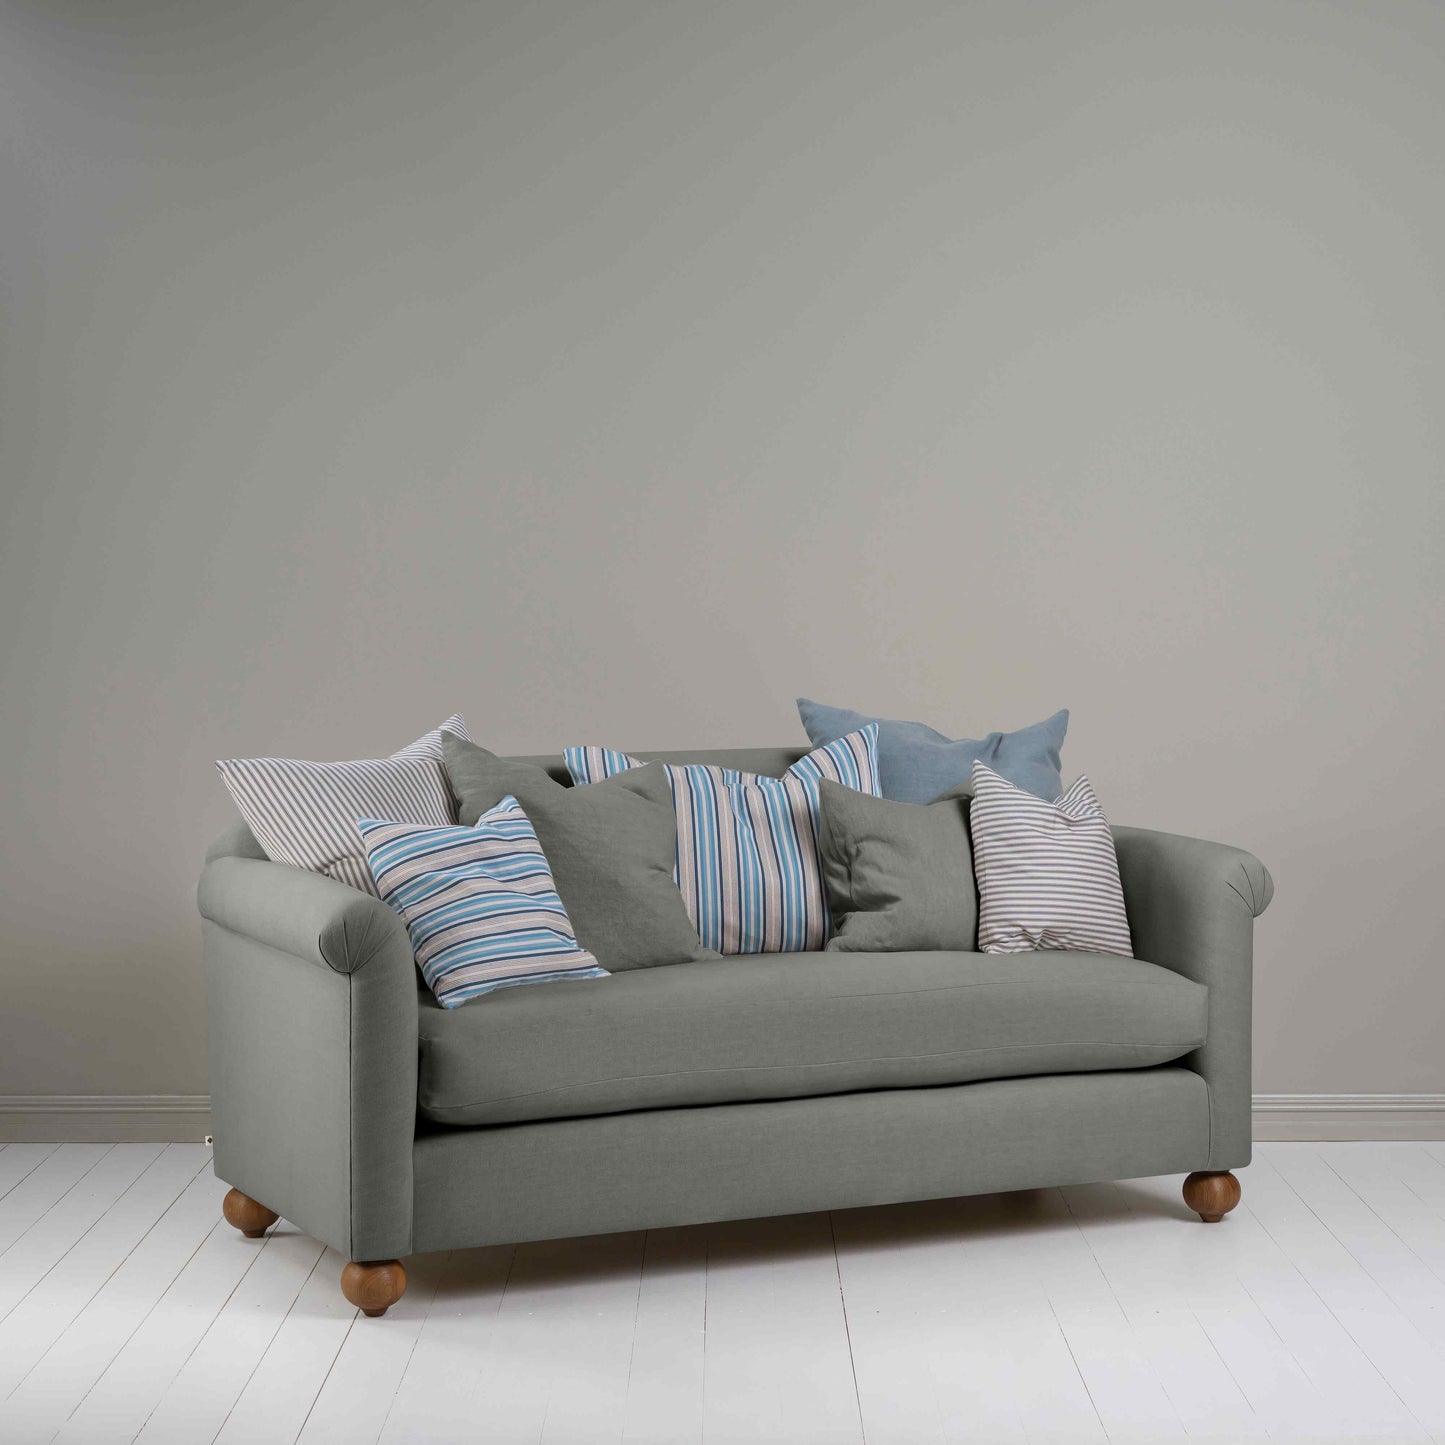 Dolittle 3 Seater Sofa in Laidback Linen Shadow